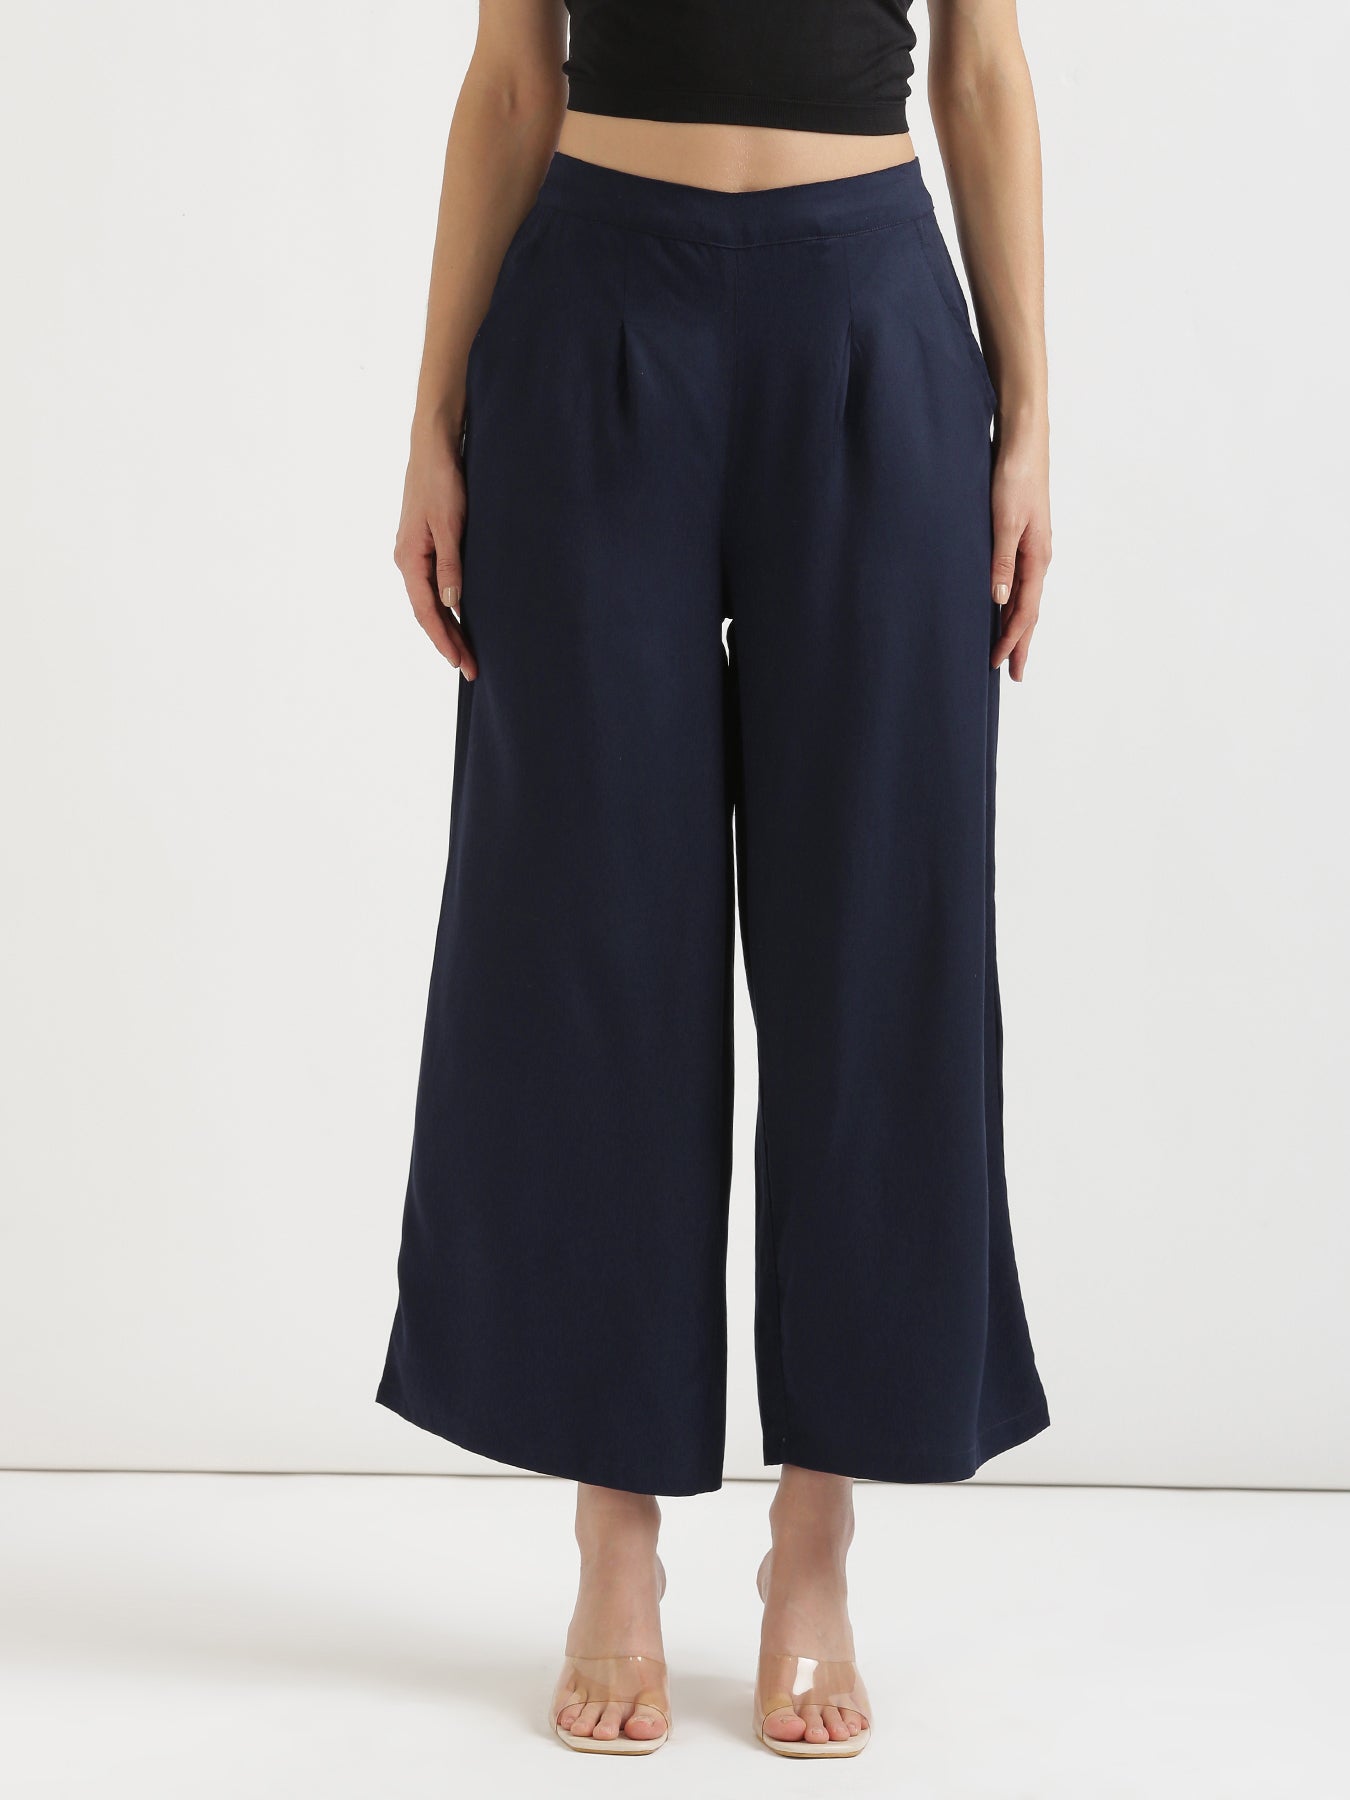 Navy Blue Palazzo Pants For Women | Shop online from सादा /SAADAA ...